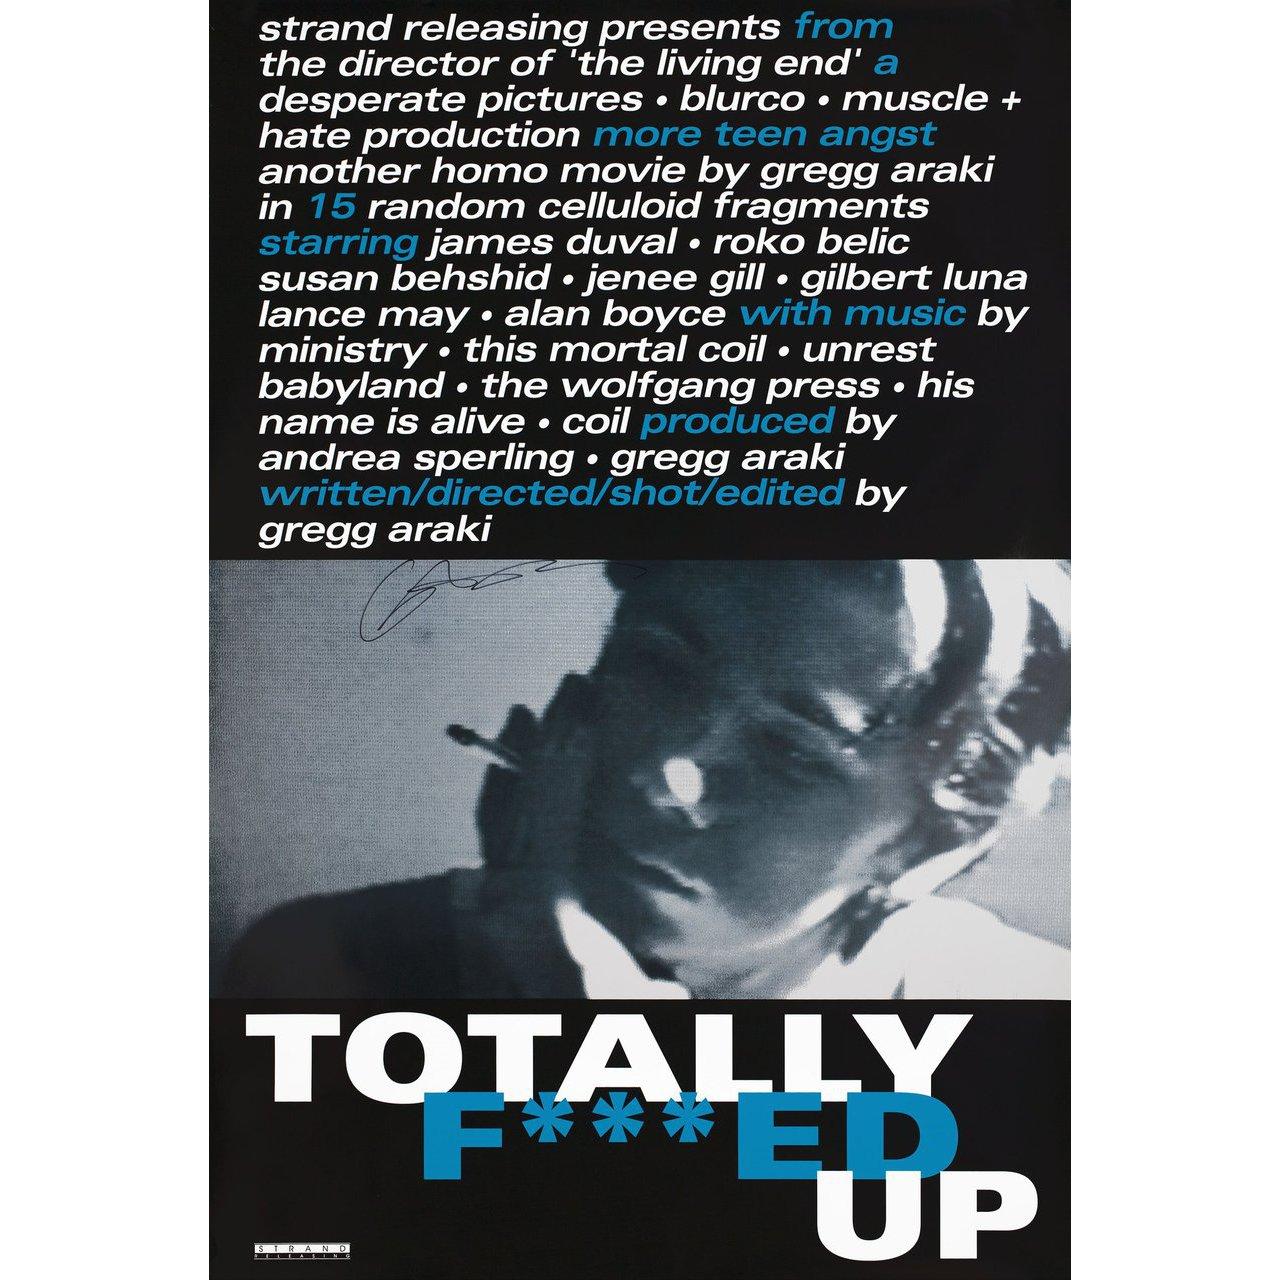 Original 1993 U.S. one sheet poster for the film Totally F***ed Up directed by Gregg Araki with James Duval / Roko Belic / Susan Behshid / Jenee Gill. Signed by Gregg Araki. Very Good-Fine condition, rolled. Please note: the size is stated in inches